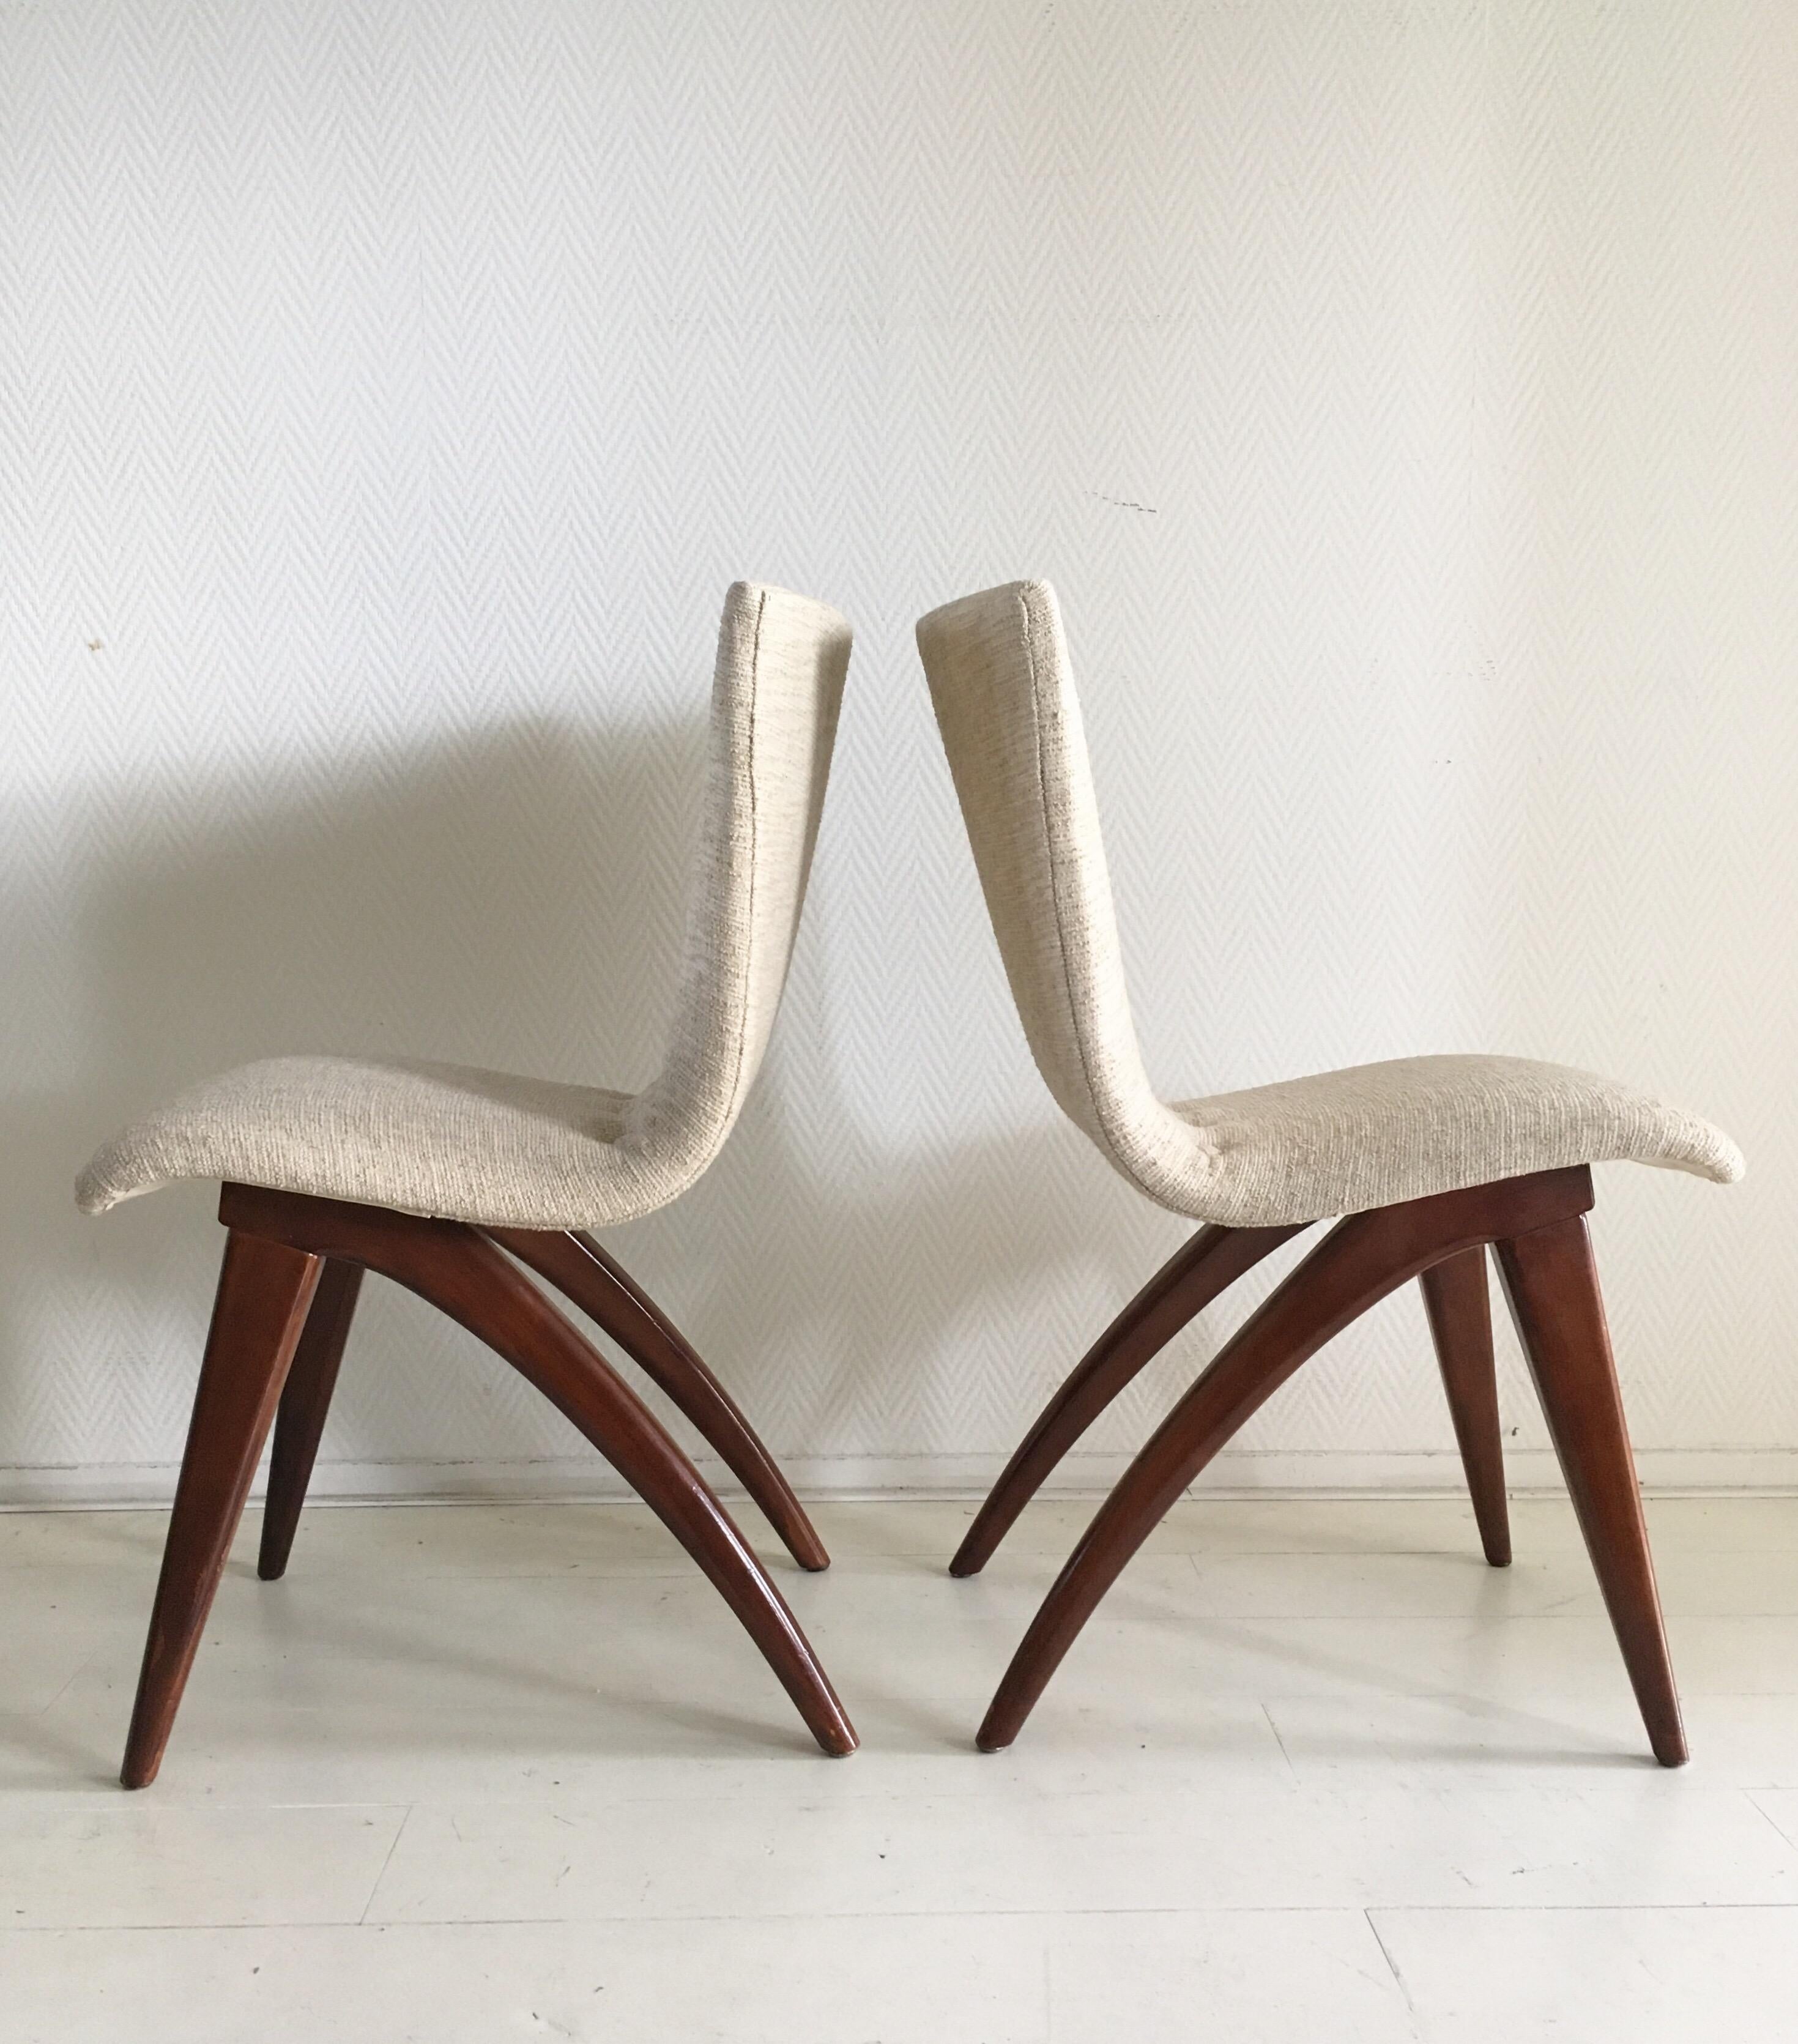 Fabric Midcentury Set of four Dining Chairs, Model Swing by CJ van Os Culemborg For Sale